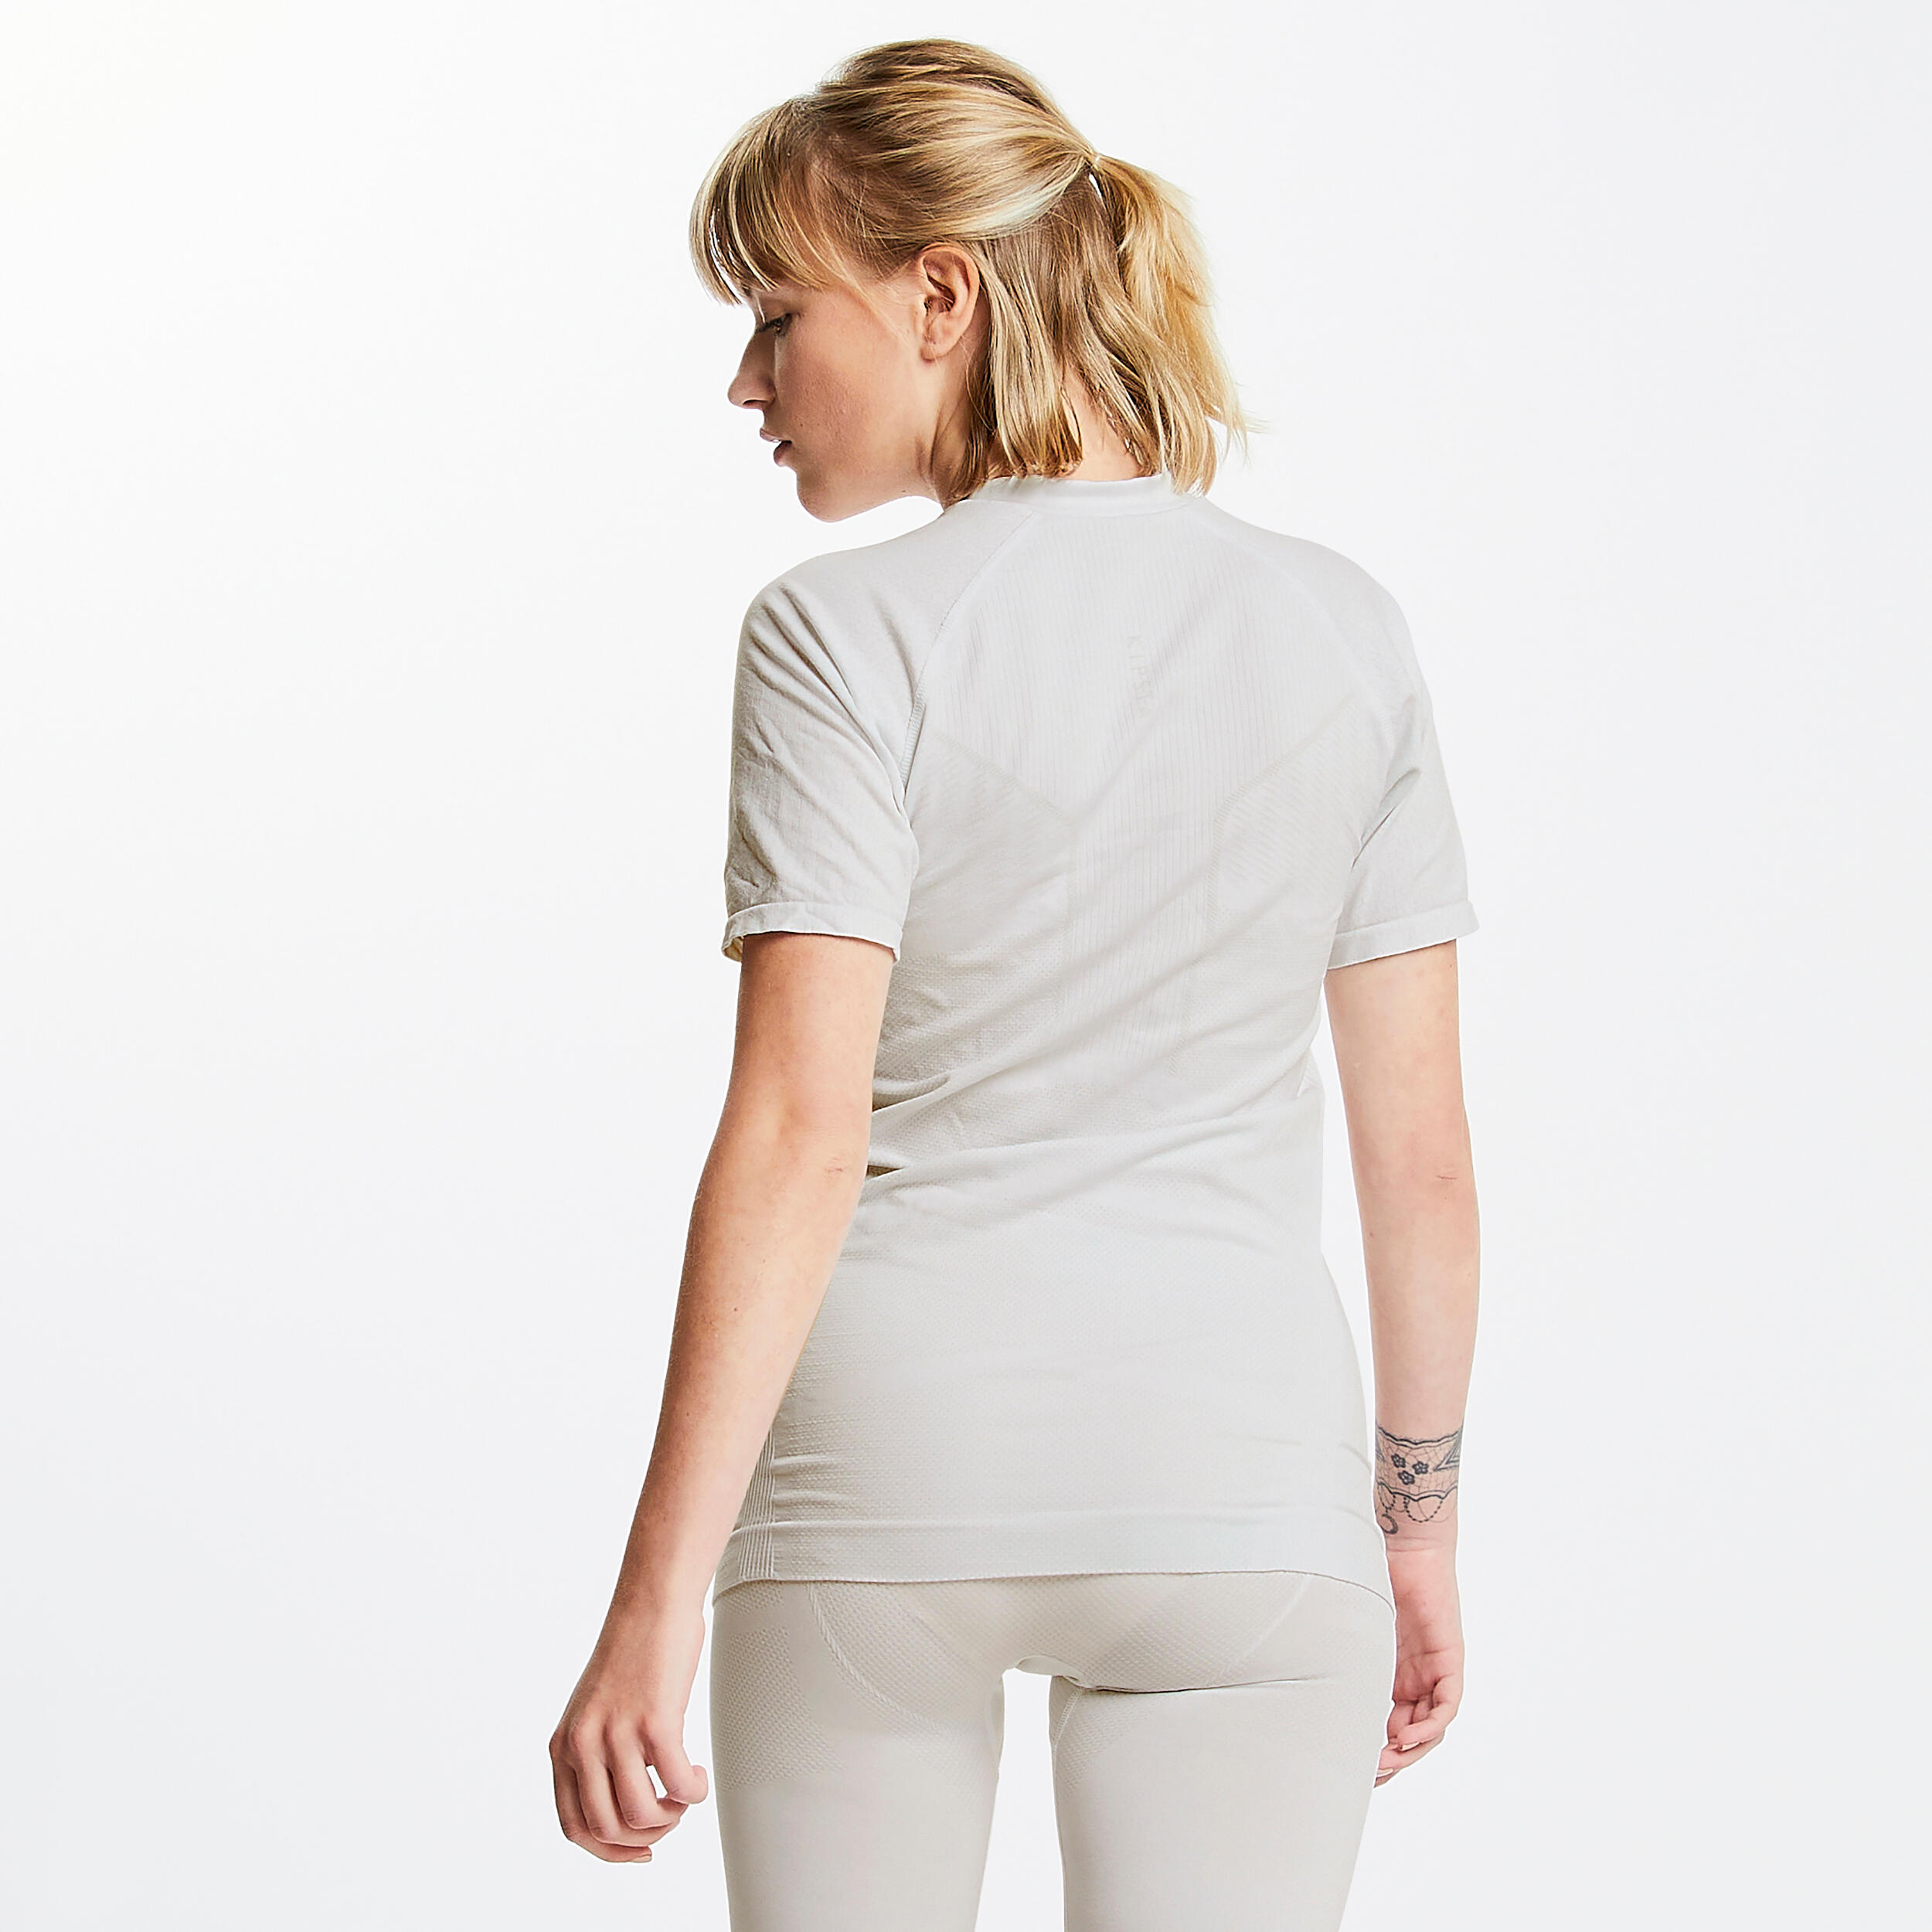 Adult Short-Sleeved Thermal Base Layer Top Keepdry 500 - White 4/7